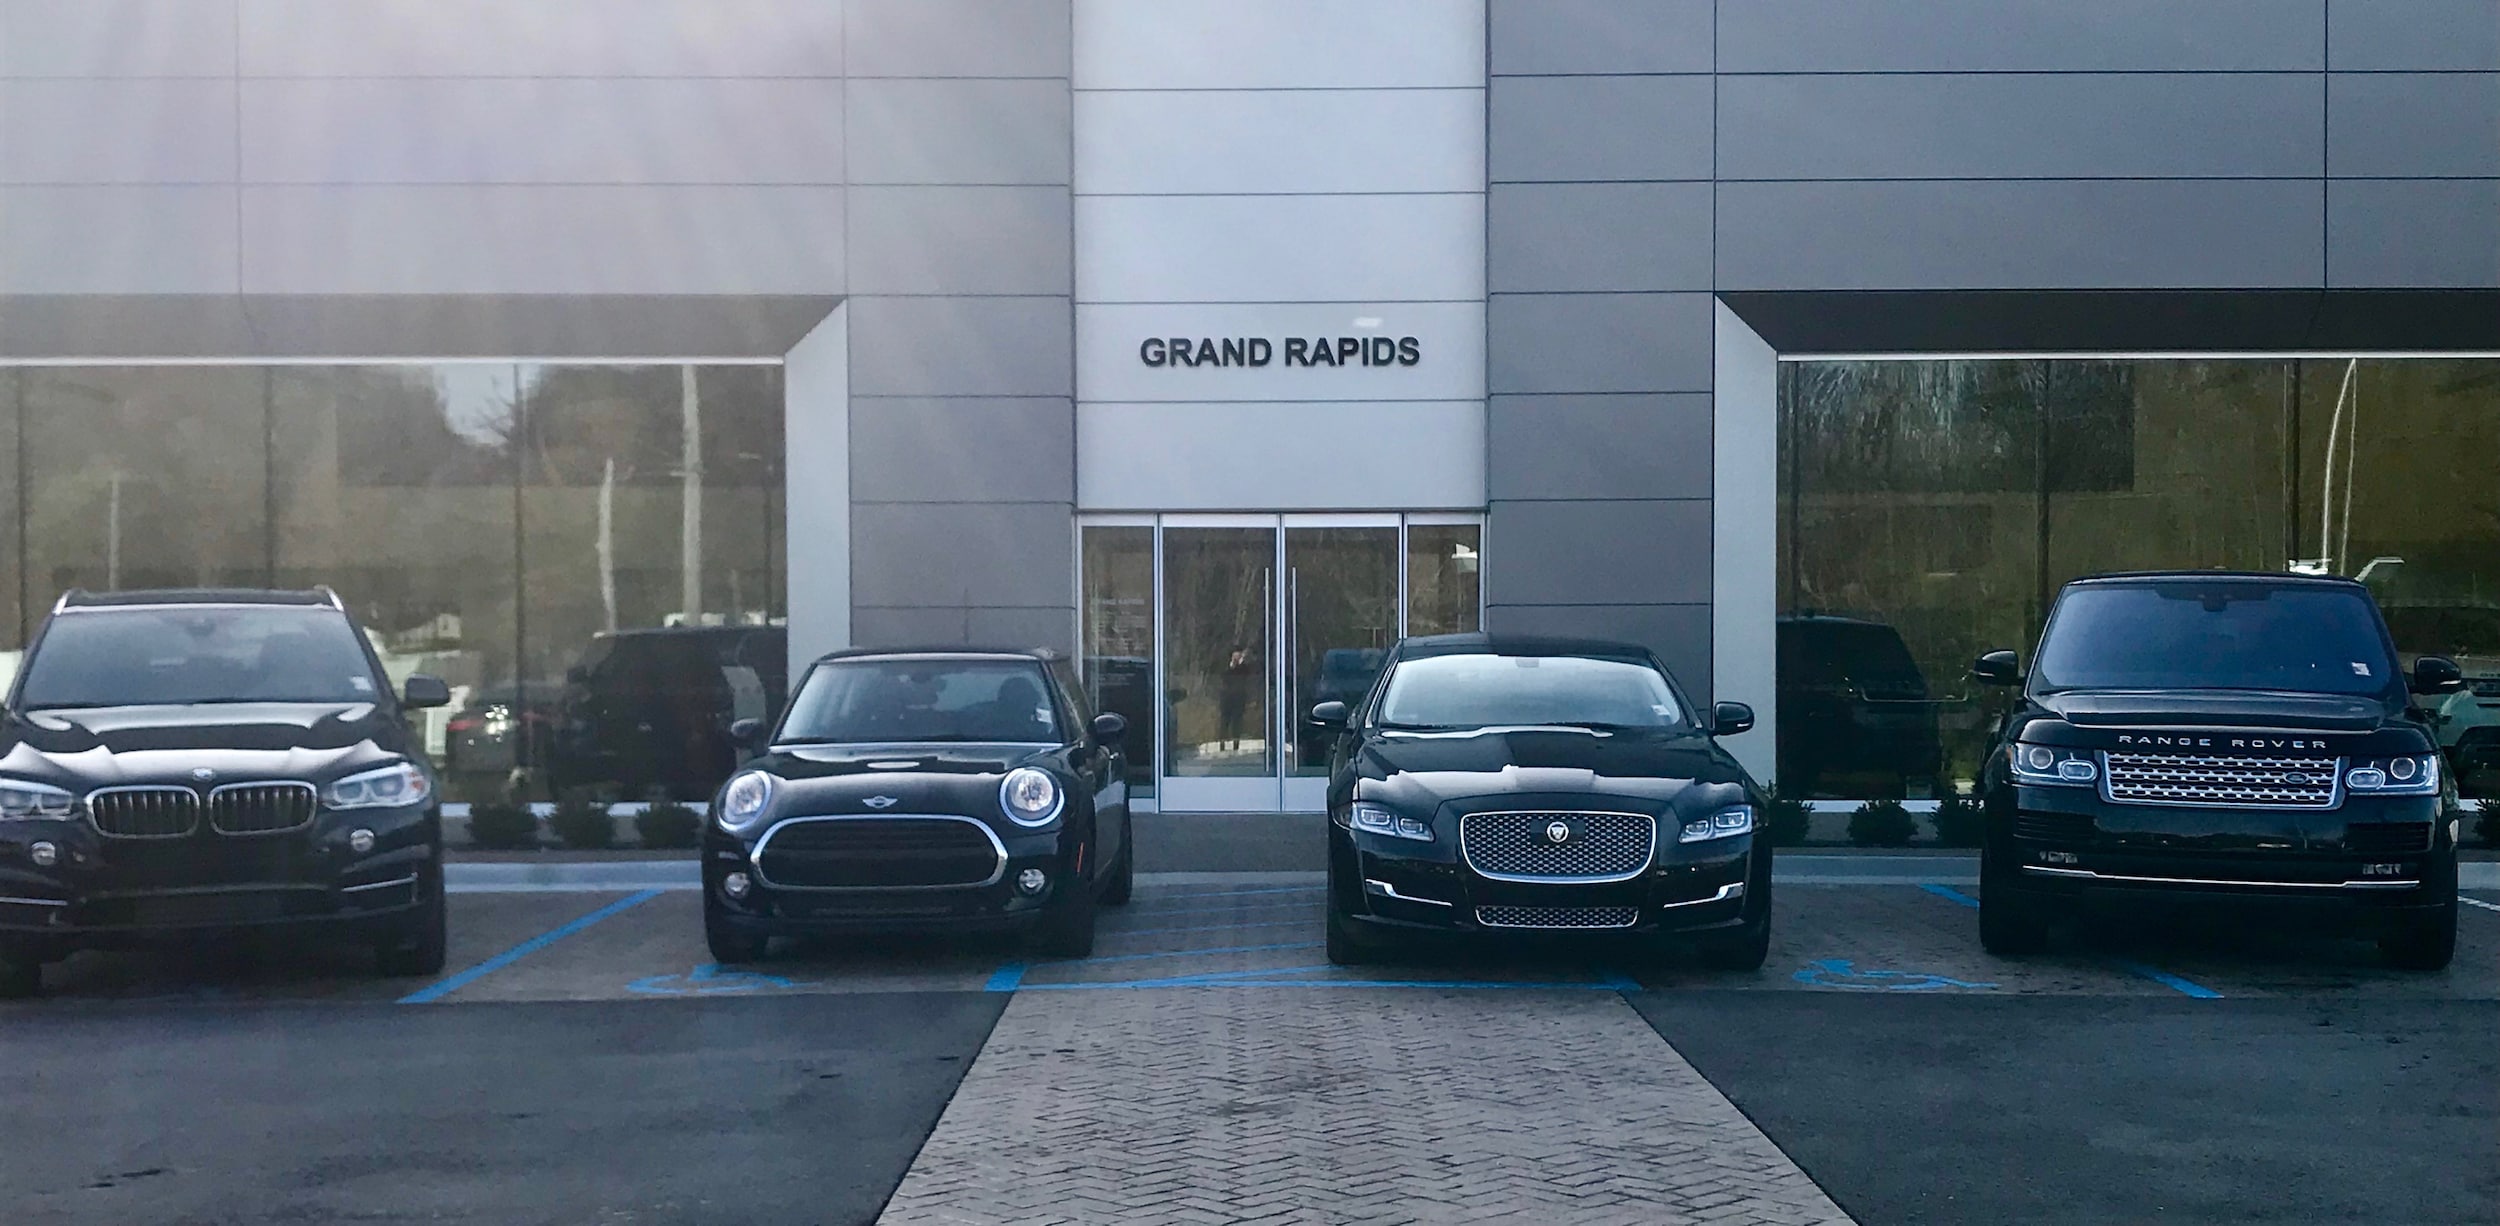 Range Rover Dealership Grand Rapids Mi  . Choose Your Country And Then Select The Services You Require As These Vary By Dealership And May Include Sales, Parts, Servicing And Repairs.